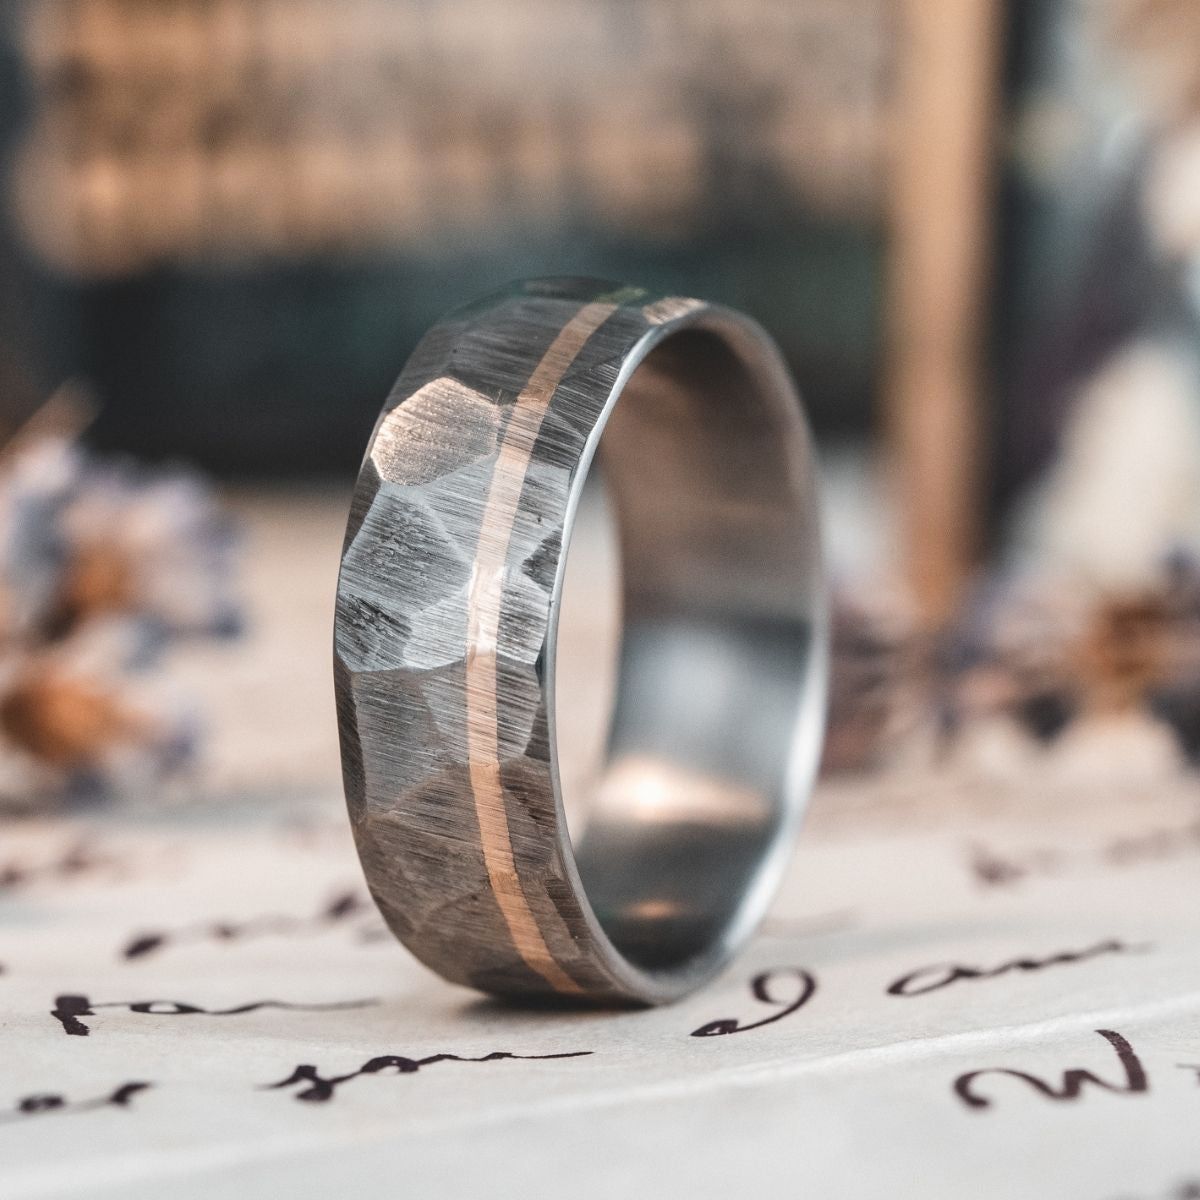 Steampunk Men's Wedding Band Made of Solid Titanium and Brass